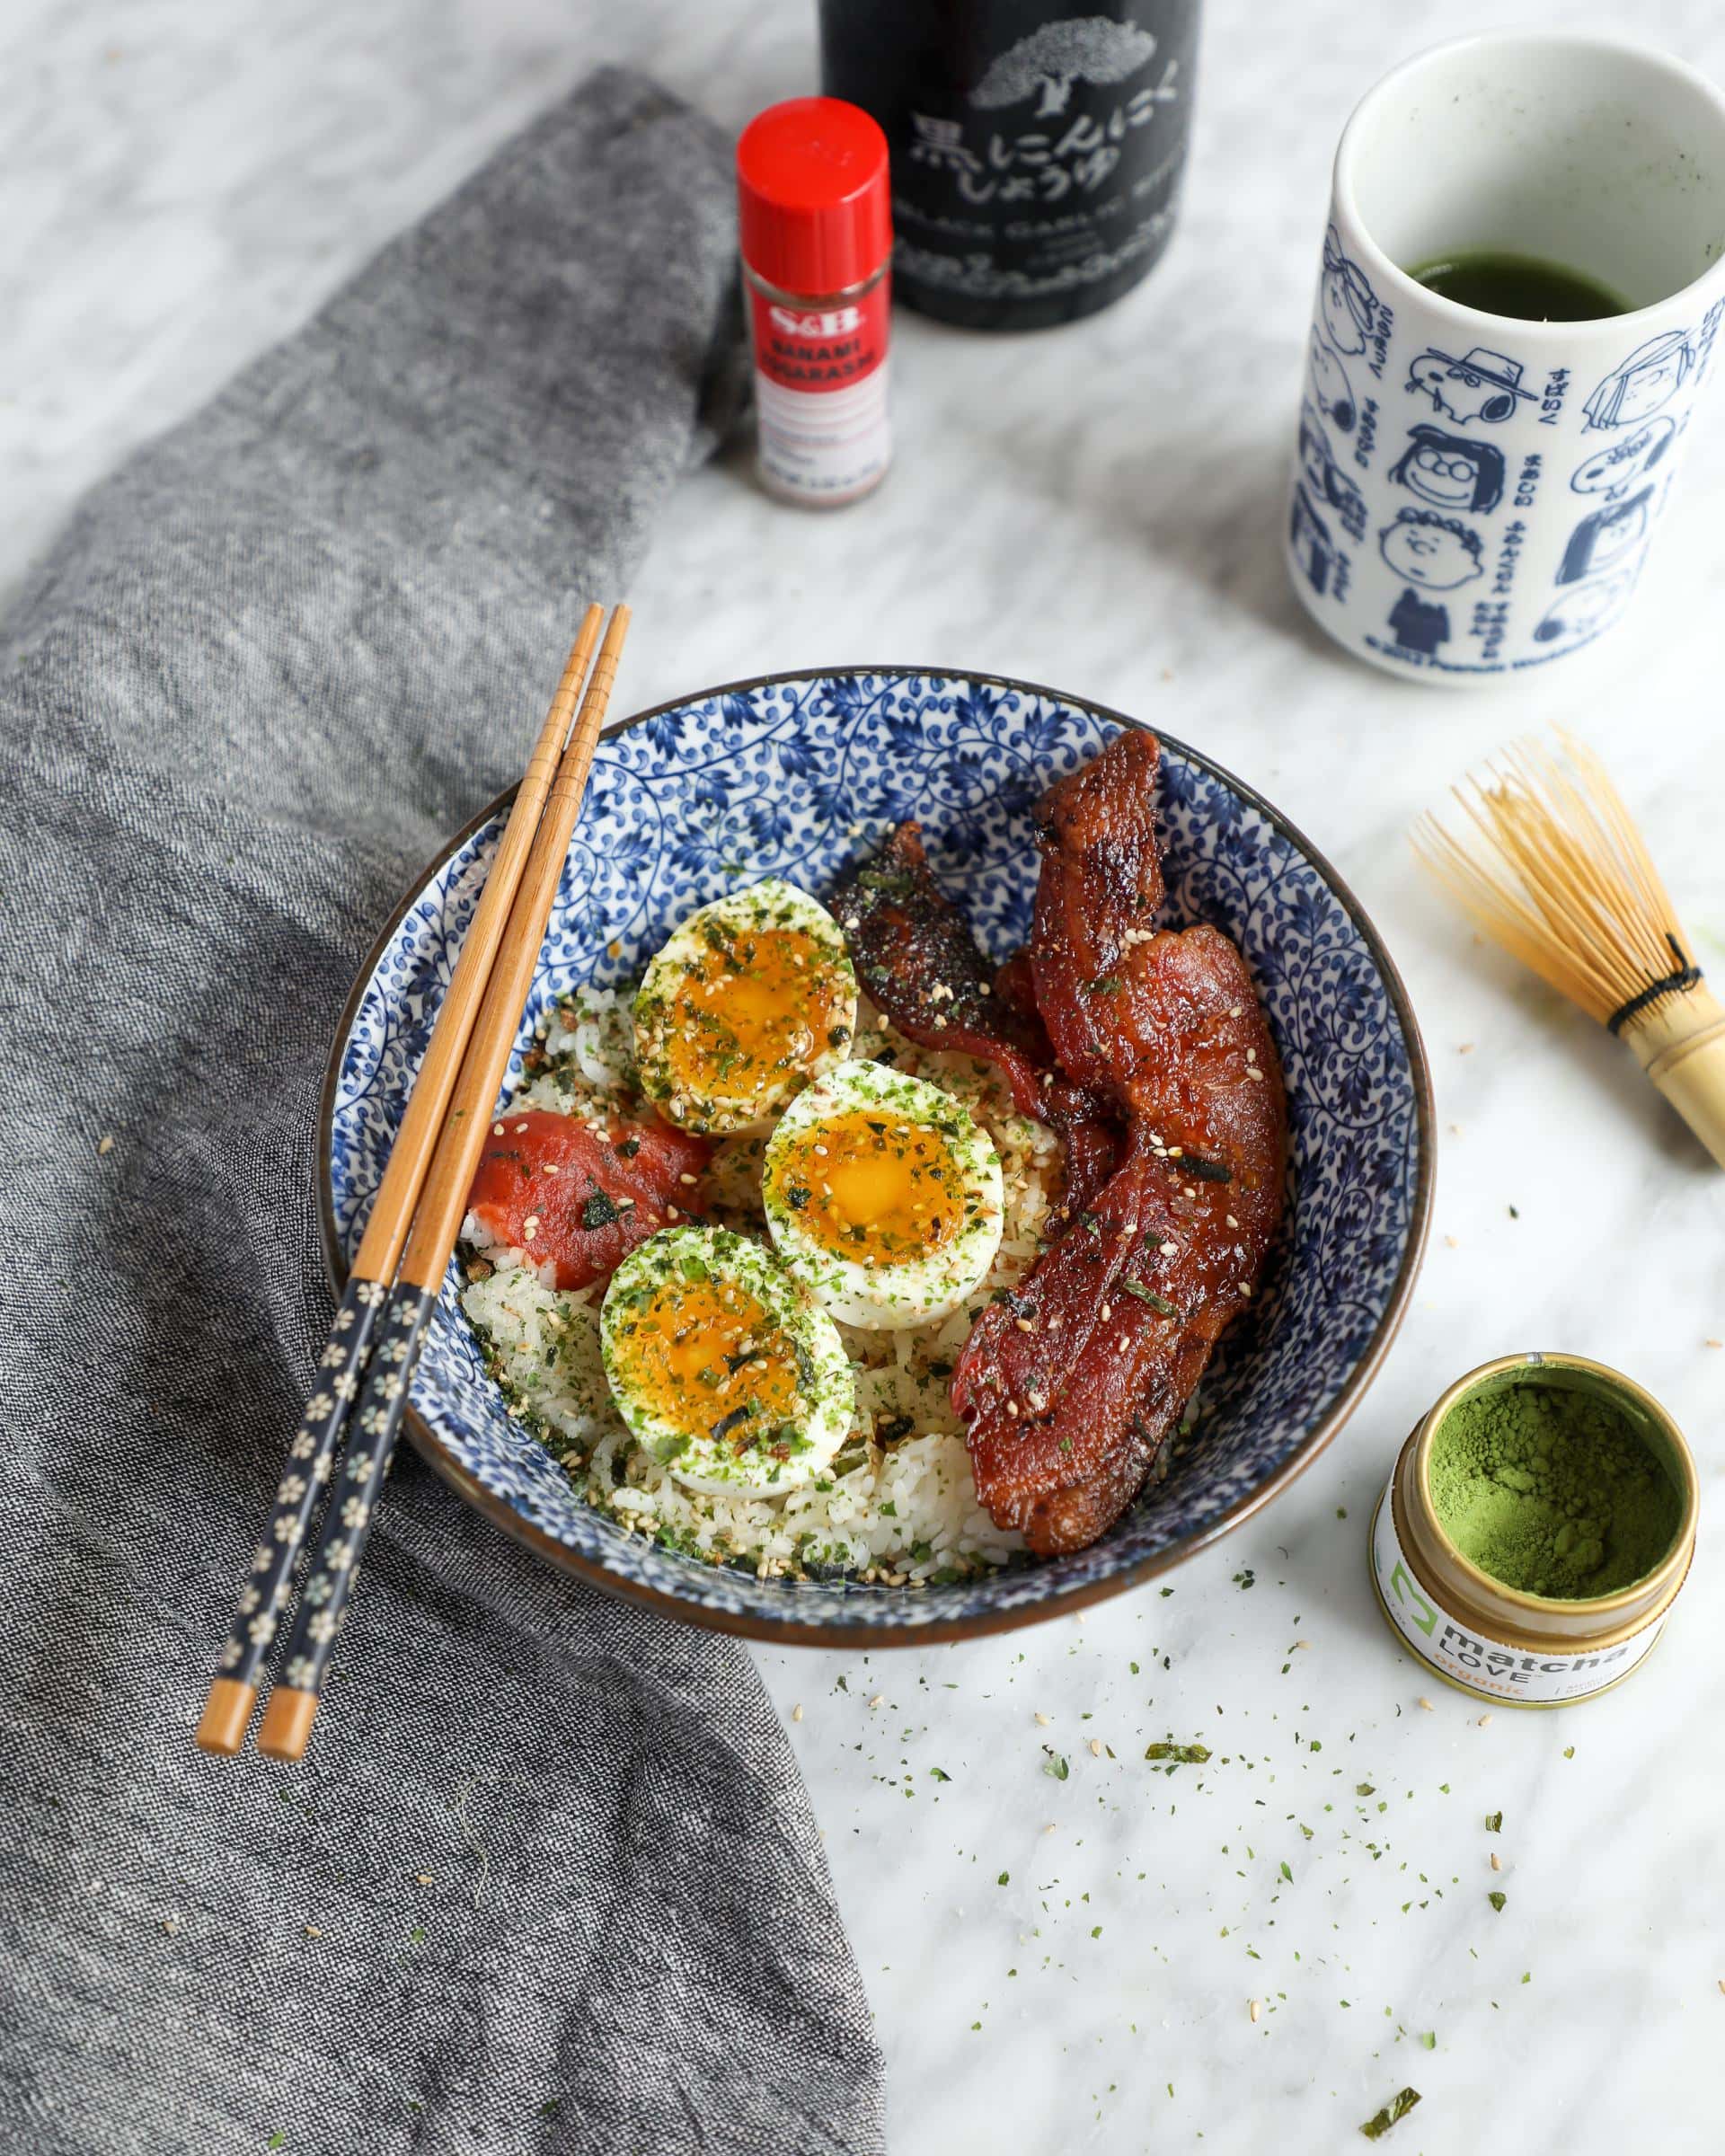 Egg and Rice Bowl Recipe